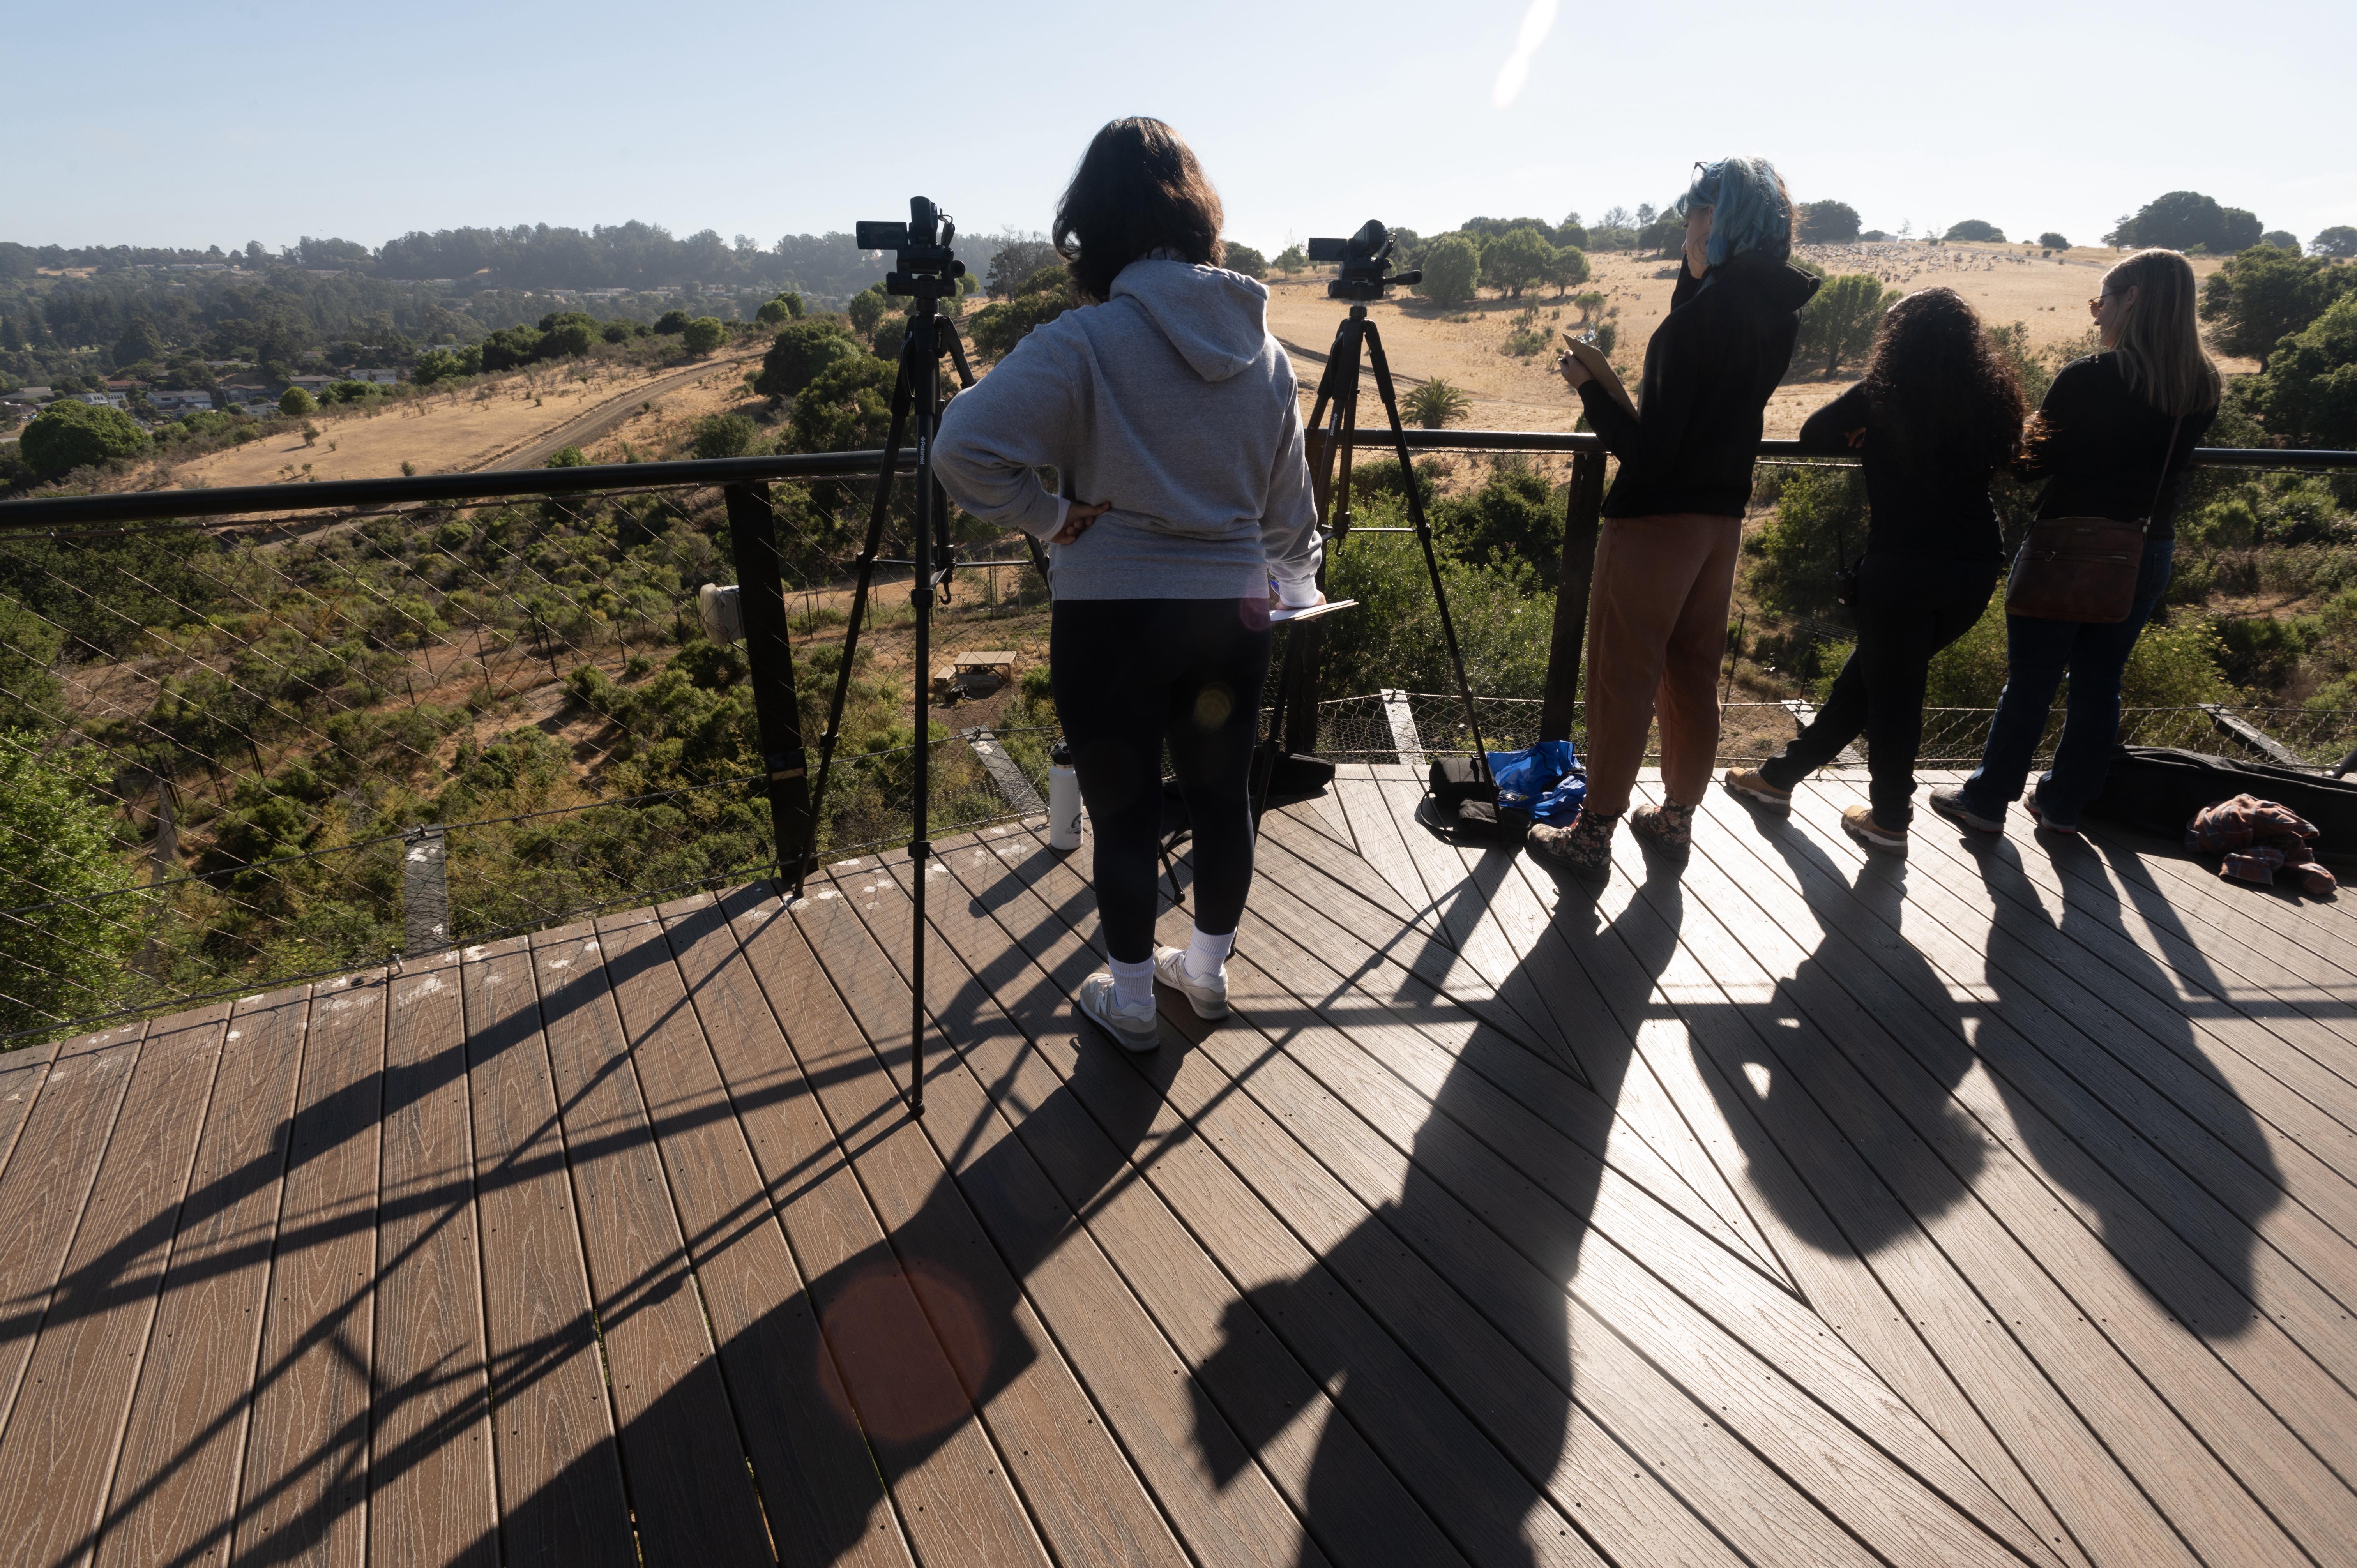 The research team at the Oakland Zoo stationed on the boardwalk overlooking the gray wolf habitat. Photo by Gregory Urquiaga / UC Davis